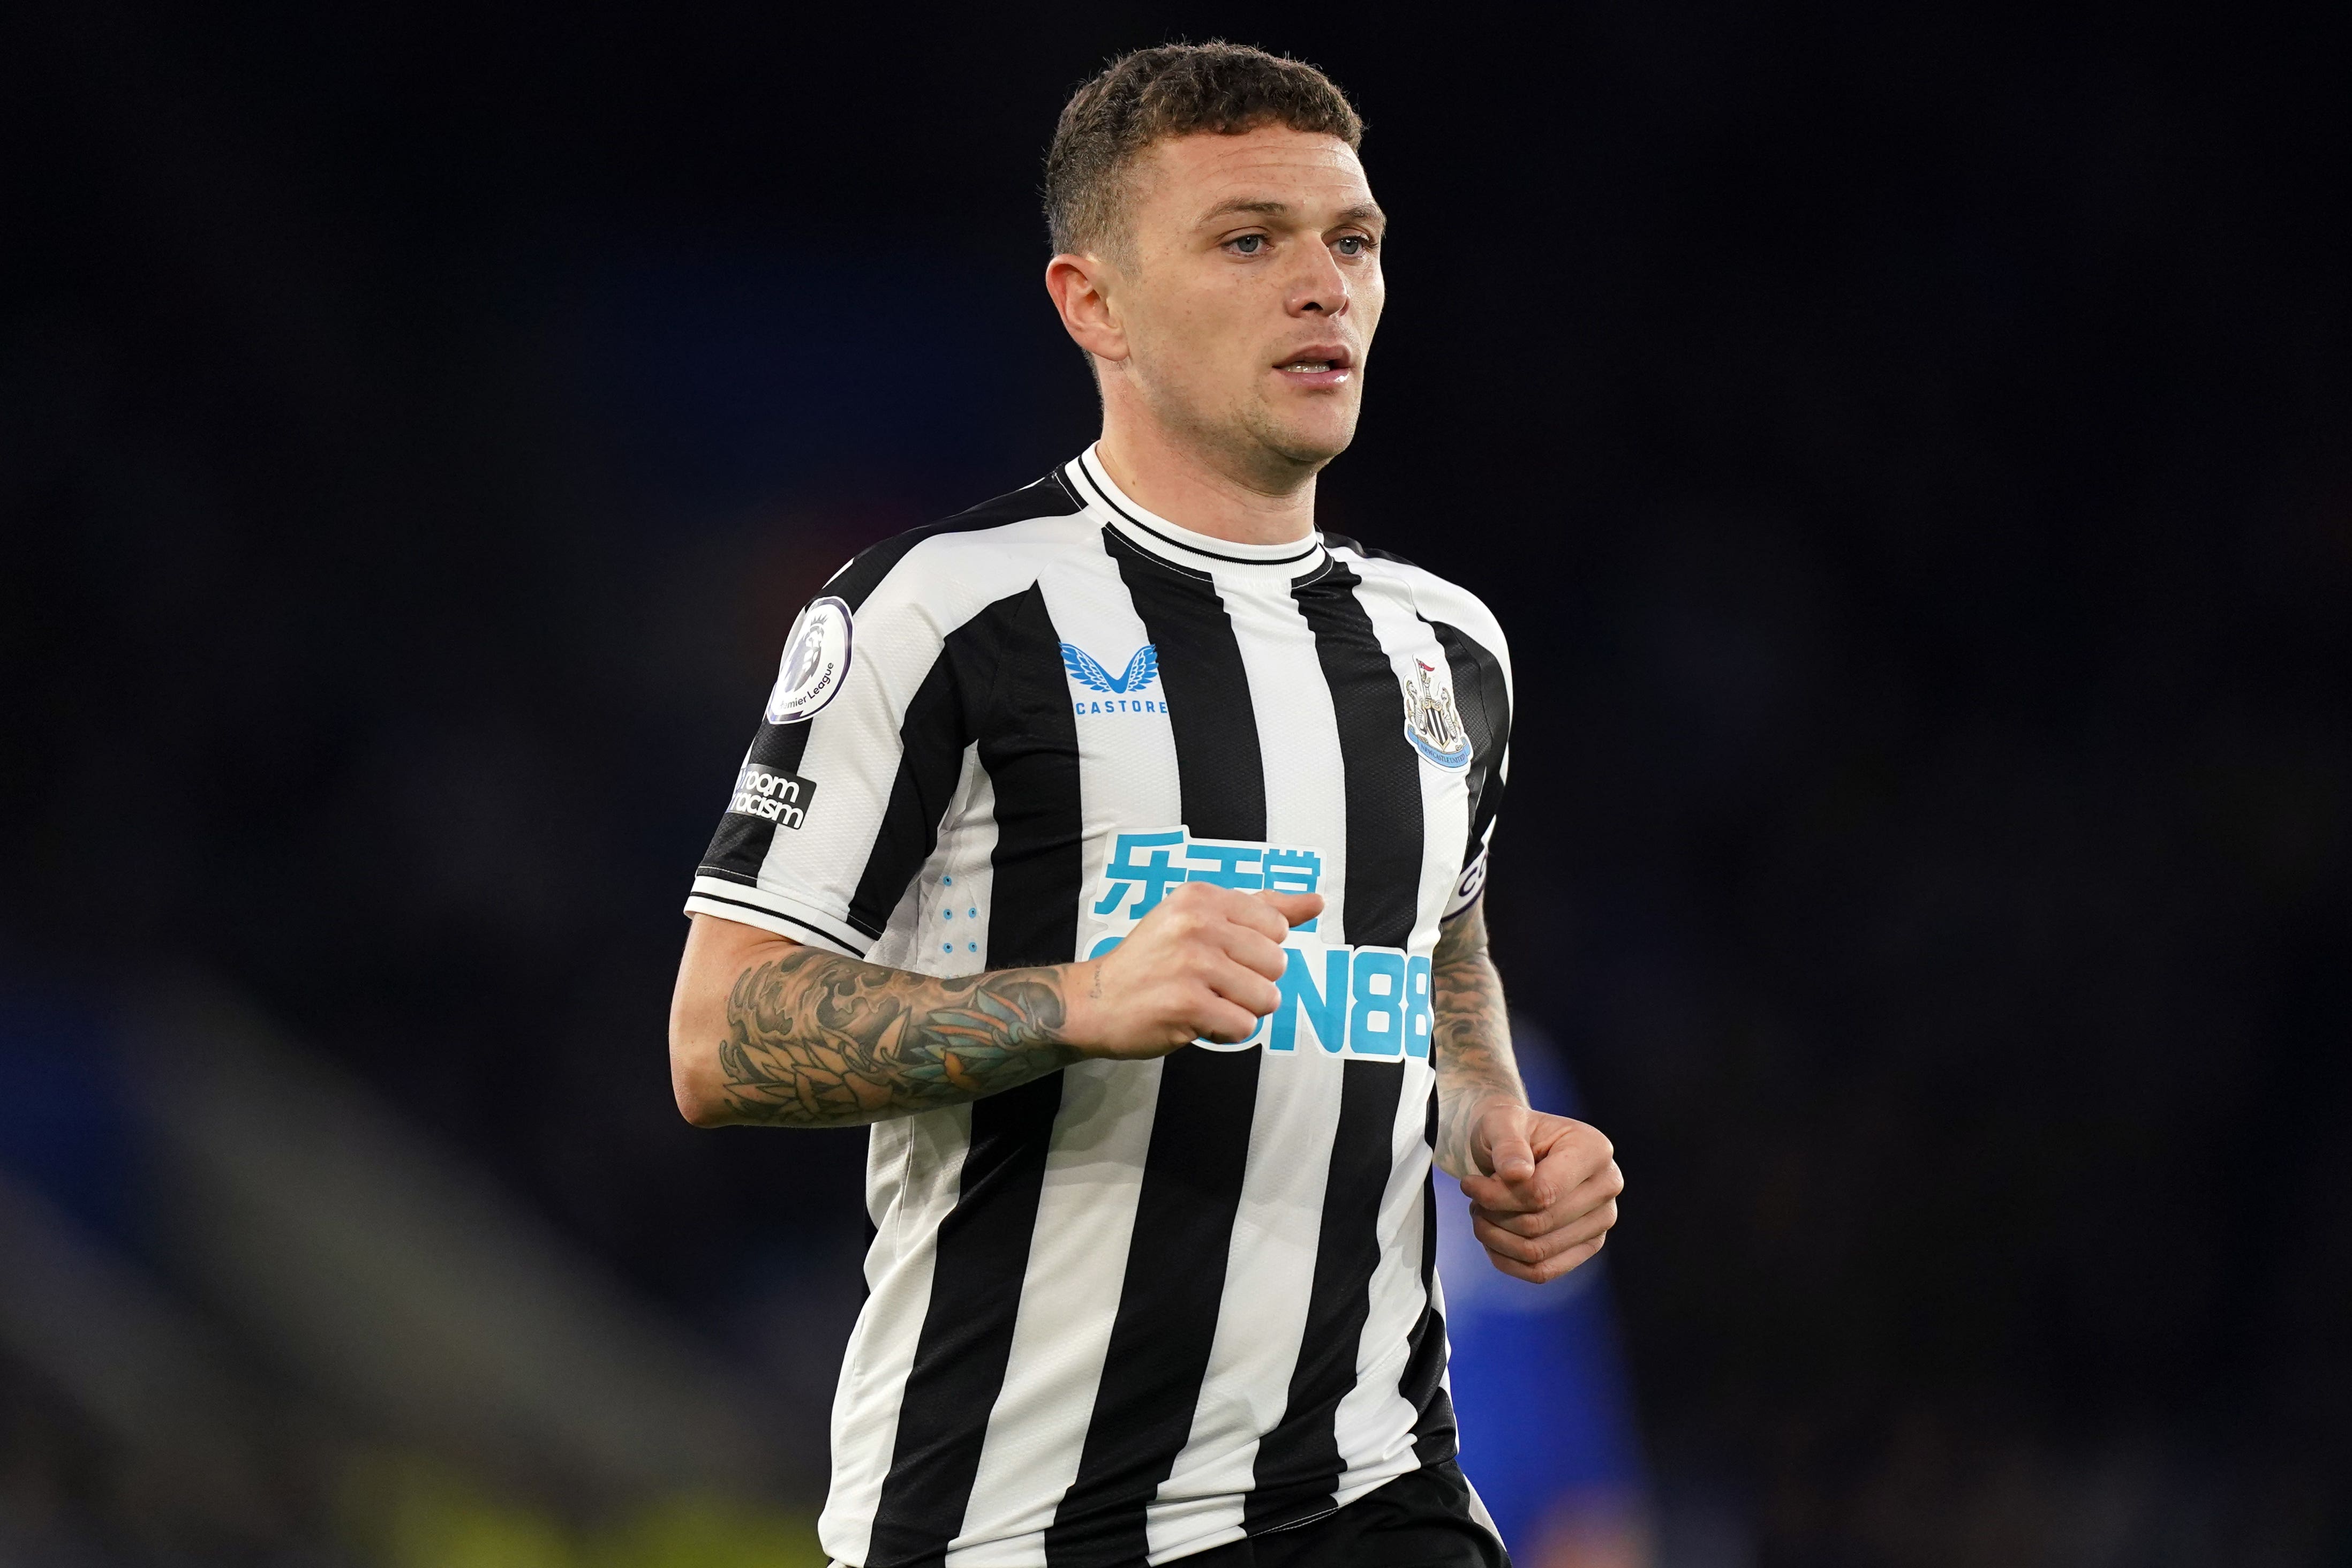 Kieran Trippier has signed with the Magpies until 2025